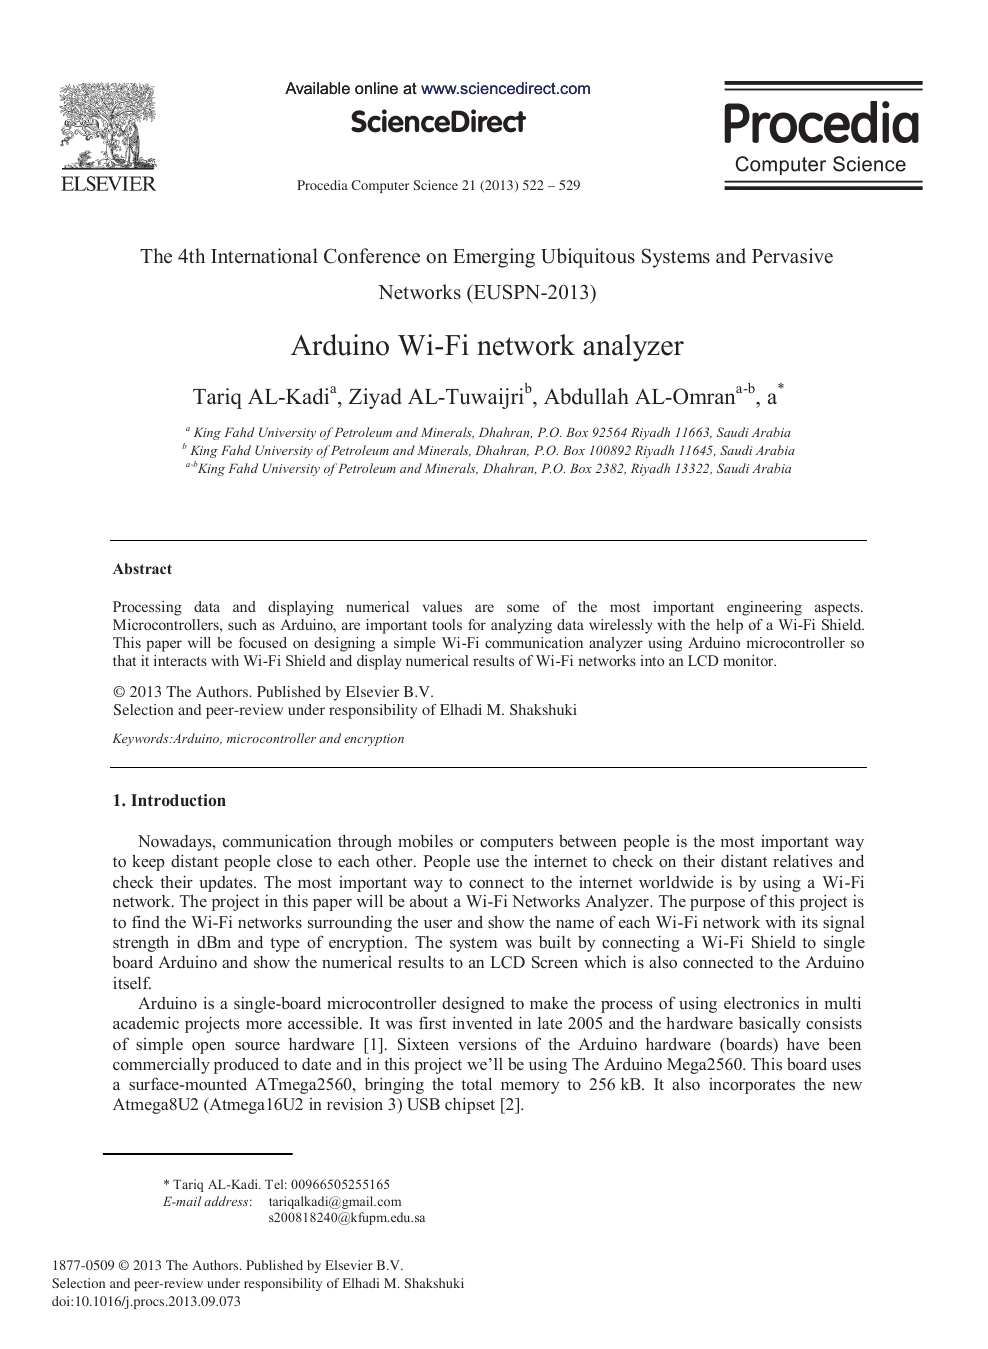 Arduino Wi Fi Network Analyzer Topic Of Research Paper In Computer And Information Sciences Download Scholarly Article Pdf And Read For Free On Cyberleninka Open Science Hub